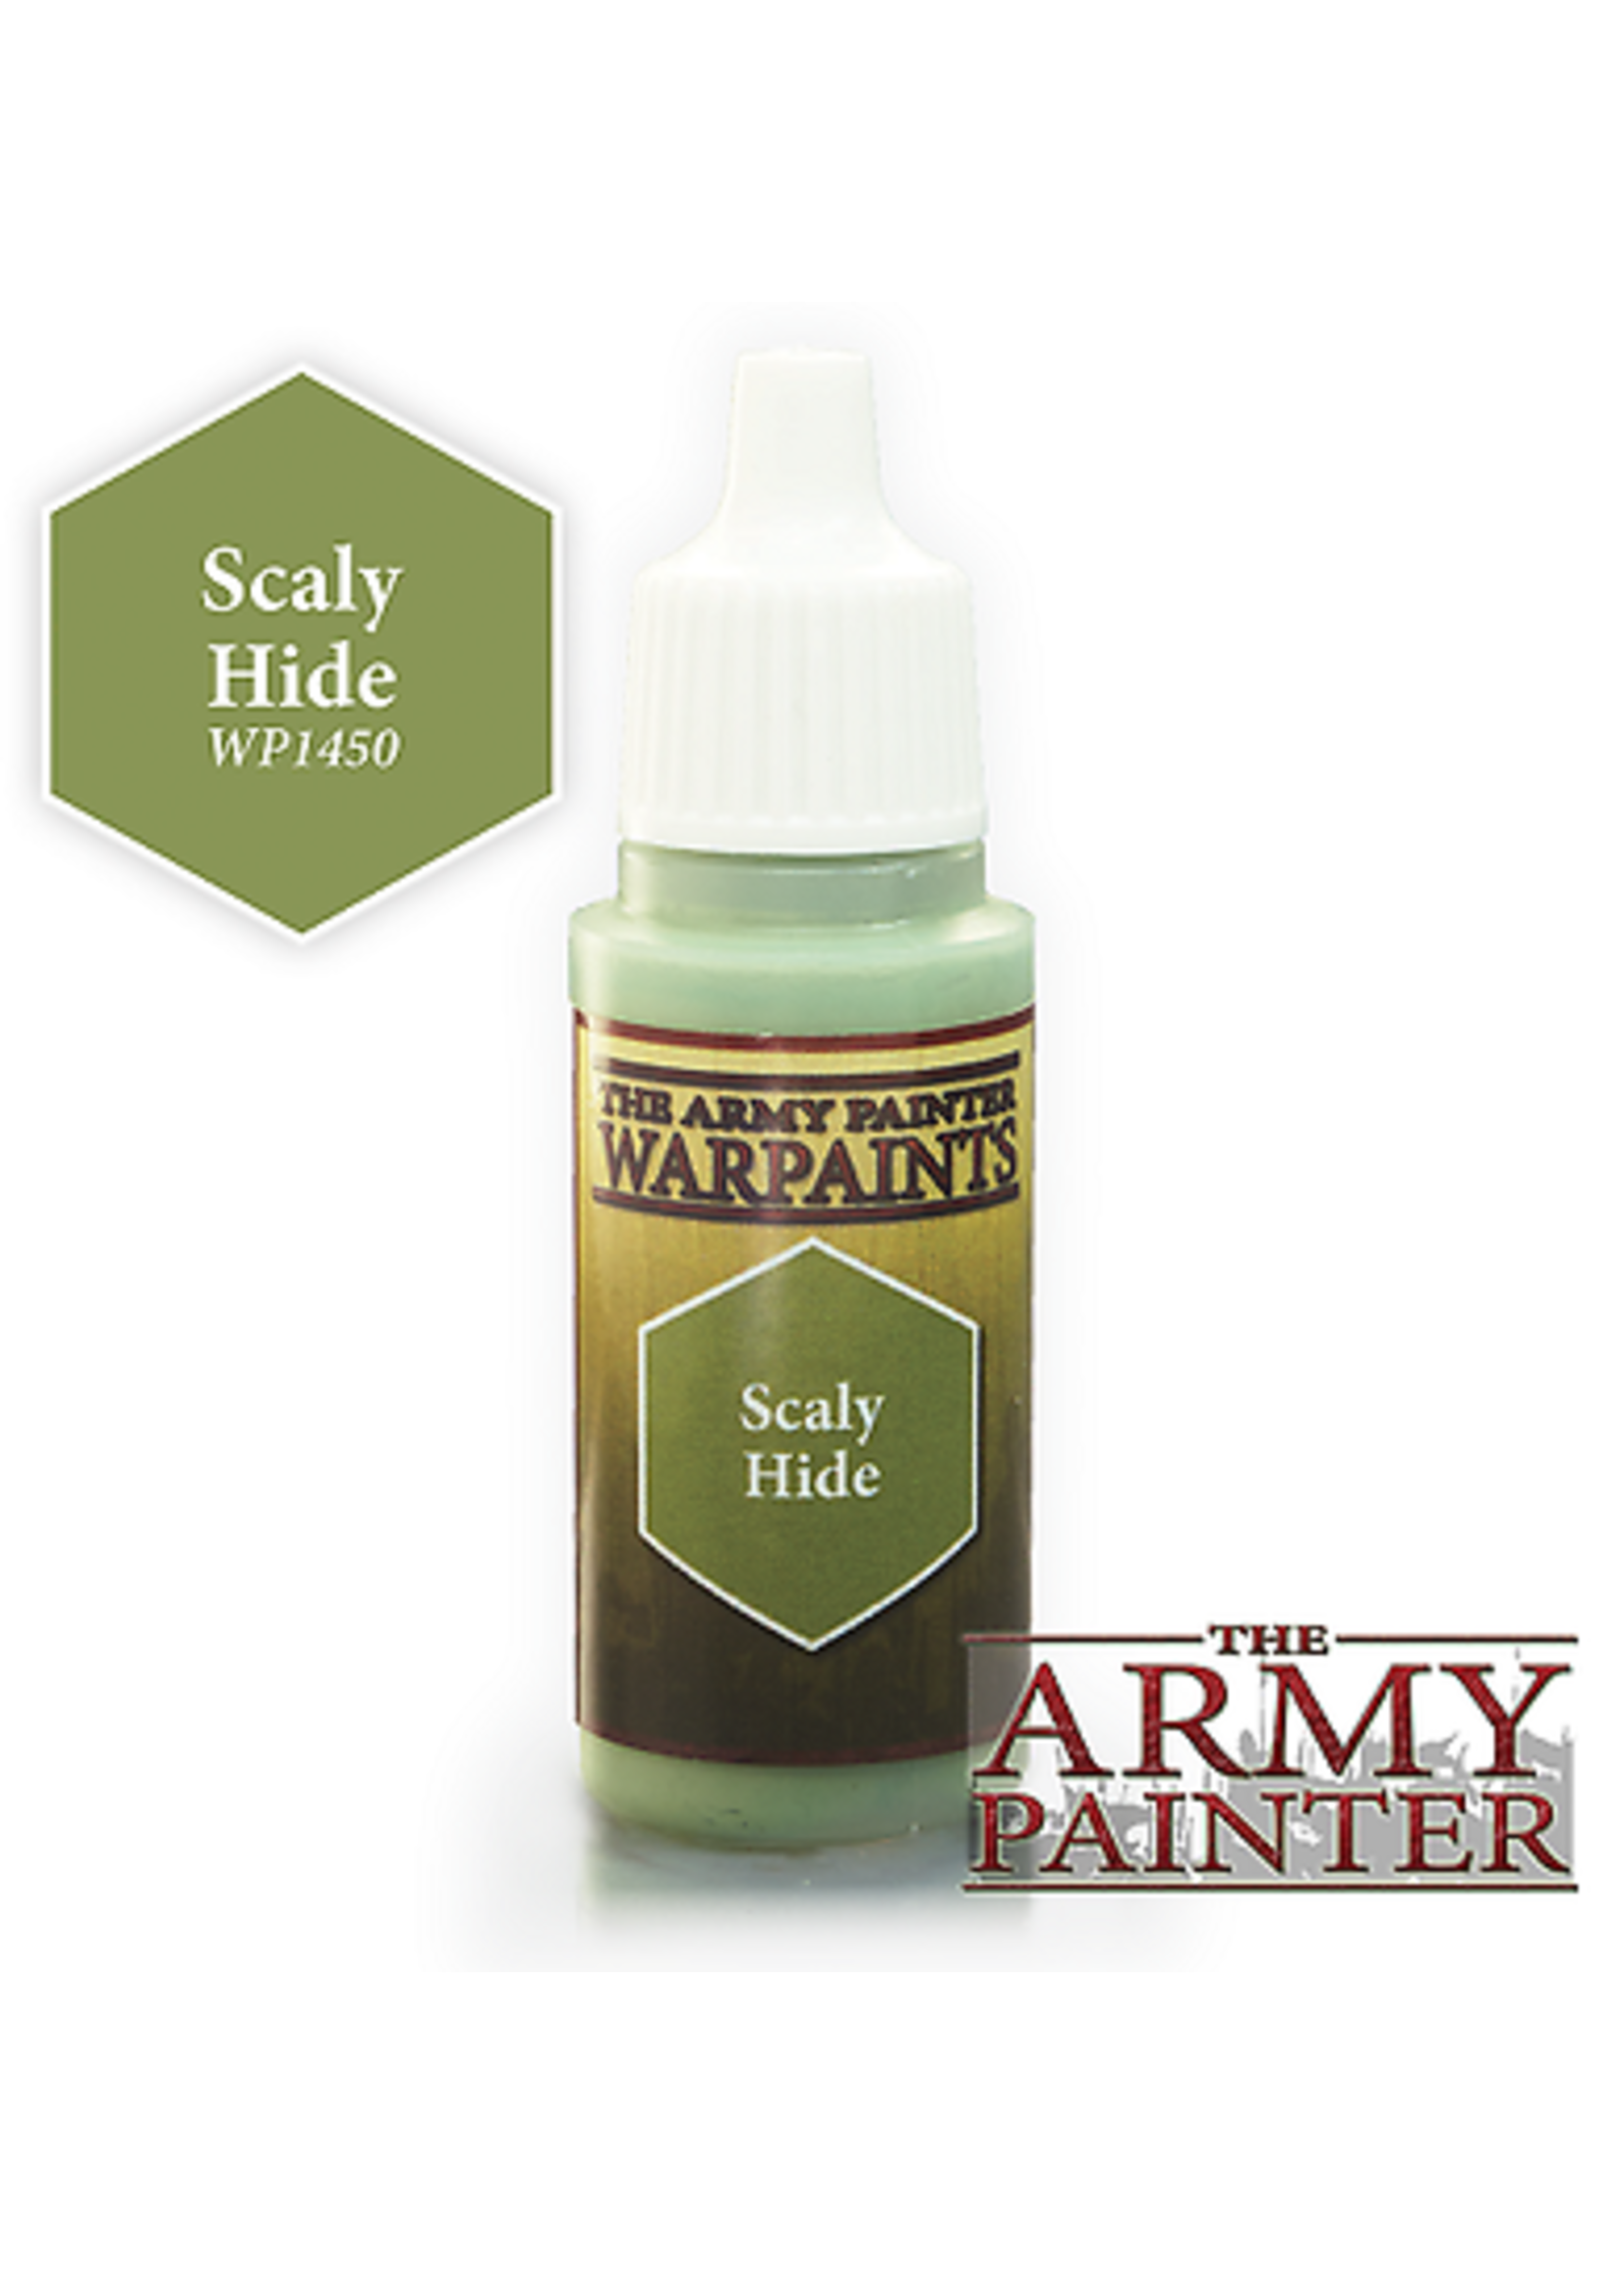 The Army Painter Acrylics Warpaints Scaly Hide